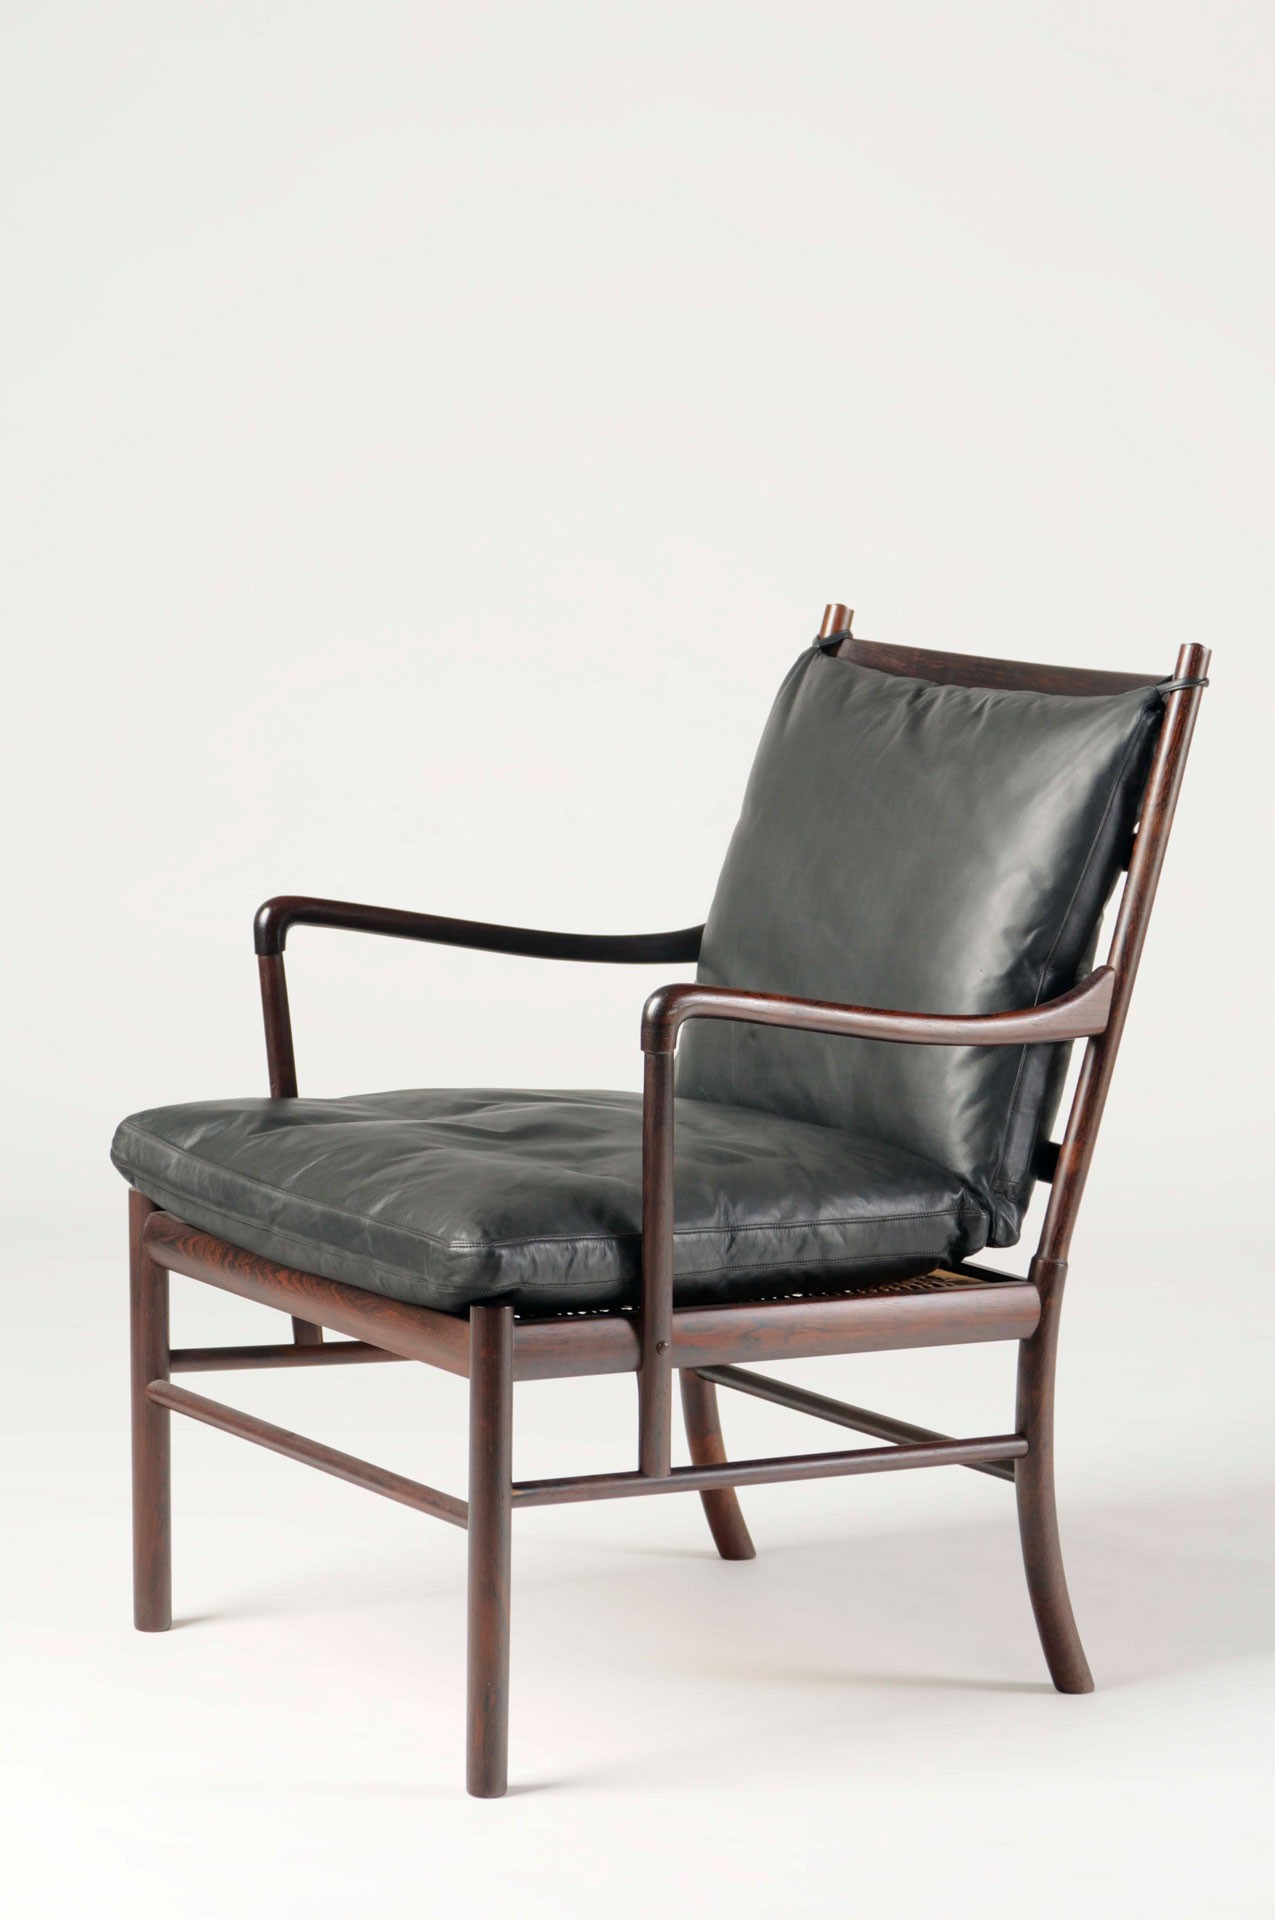 <BODY>Ole Wanscher, Armchair, Model No. PJ 149, Copenhagen, 1949<br />Rosewood, solid; wickerwork (rattan); upholstery with leather cover<br />© MAK/Nathan Murrell</BODY>